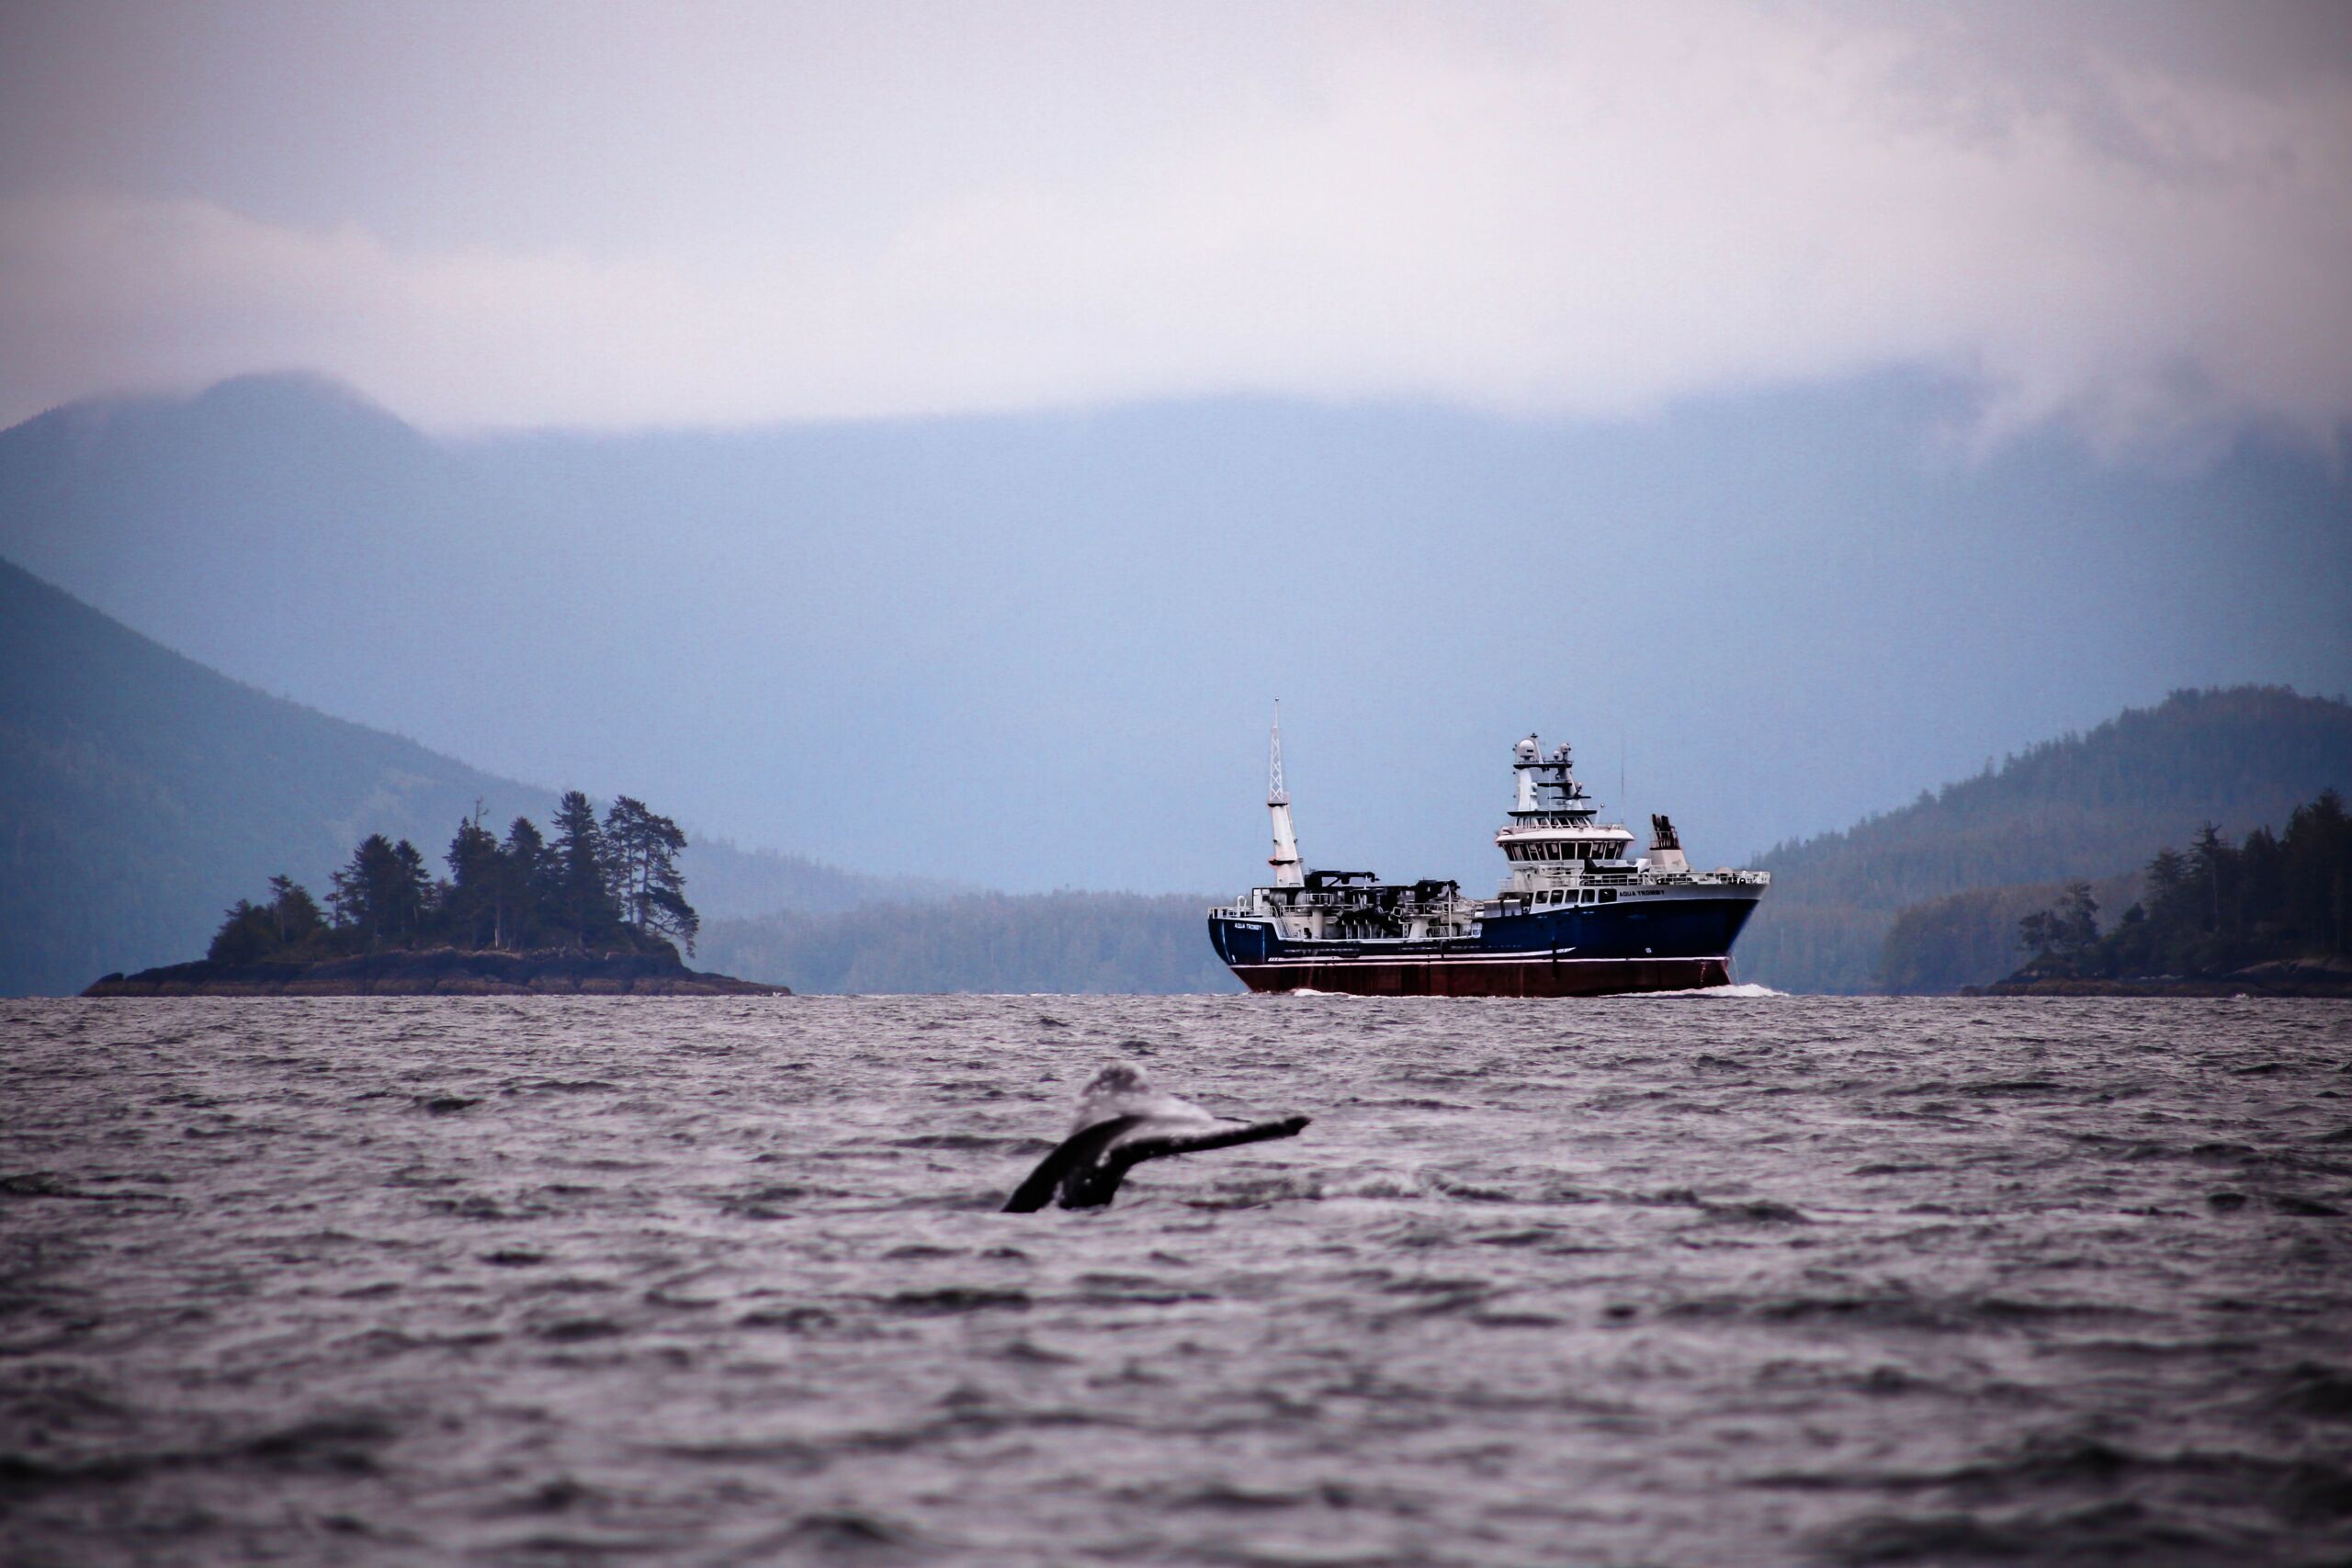 clayoquot sound whale watching